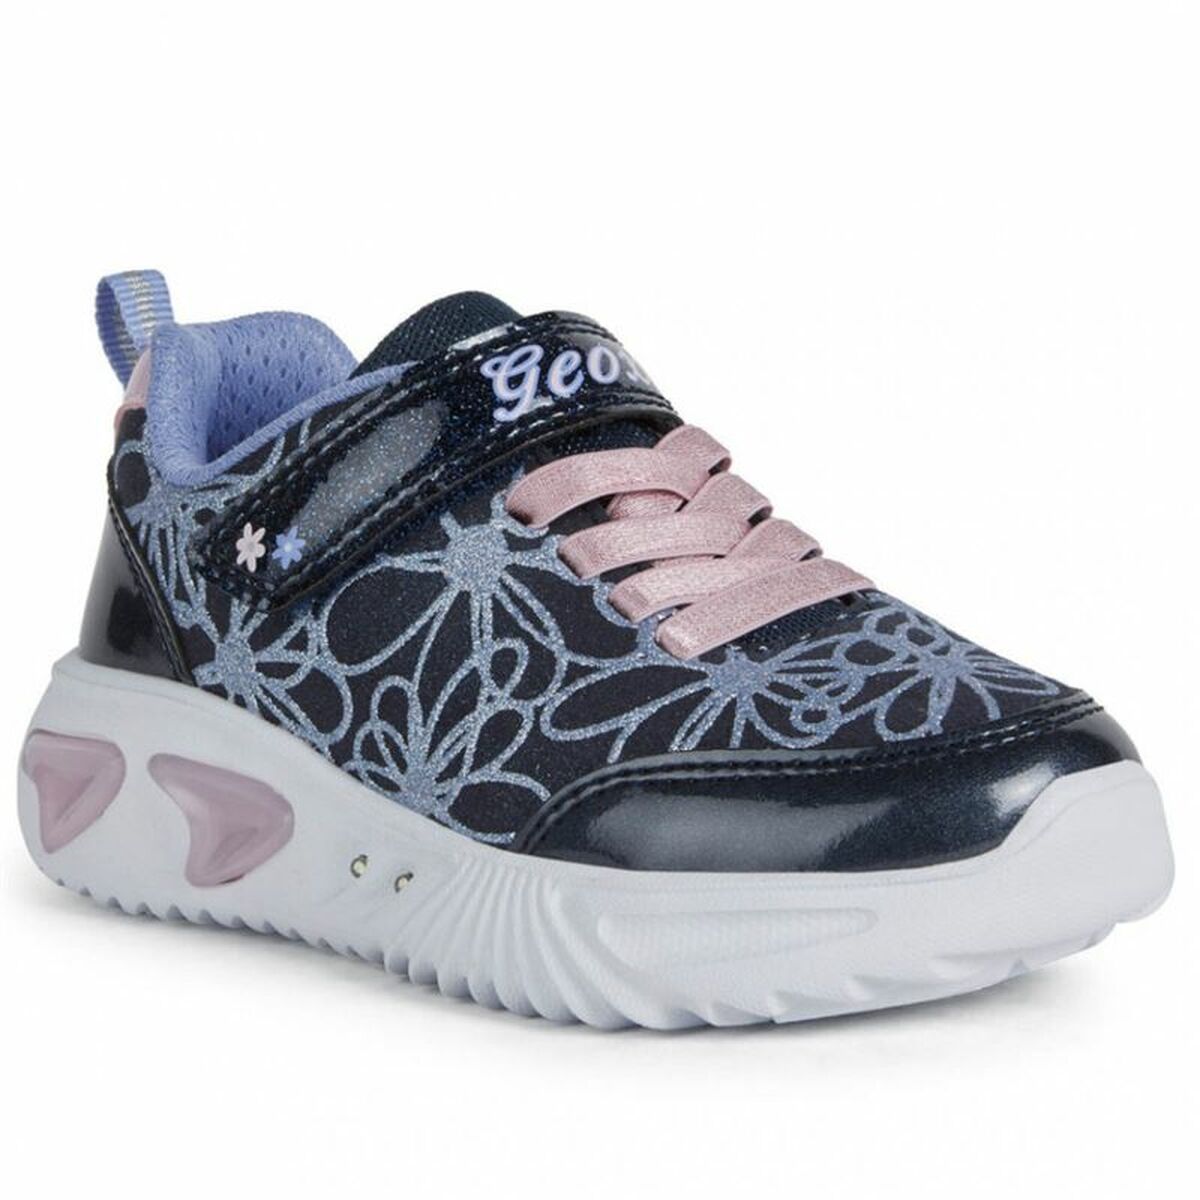 Chaussures casual enfant Geox Assiter Blue marine